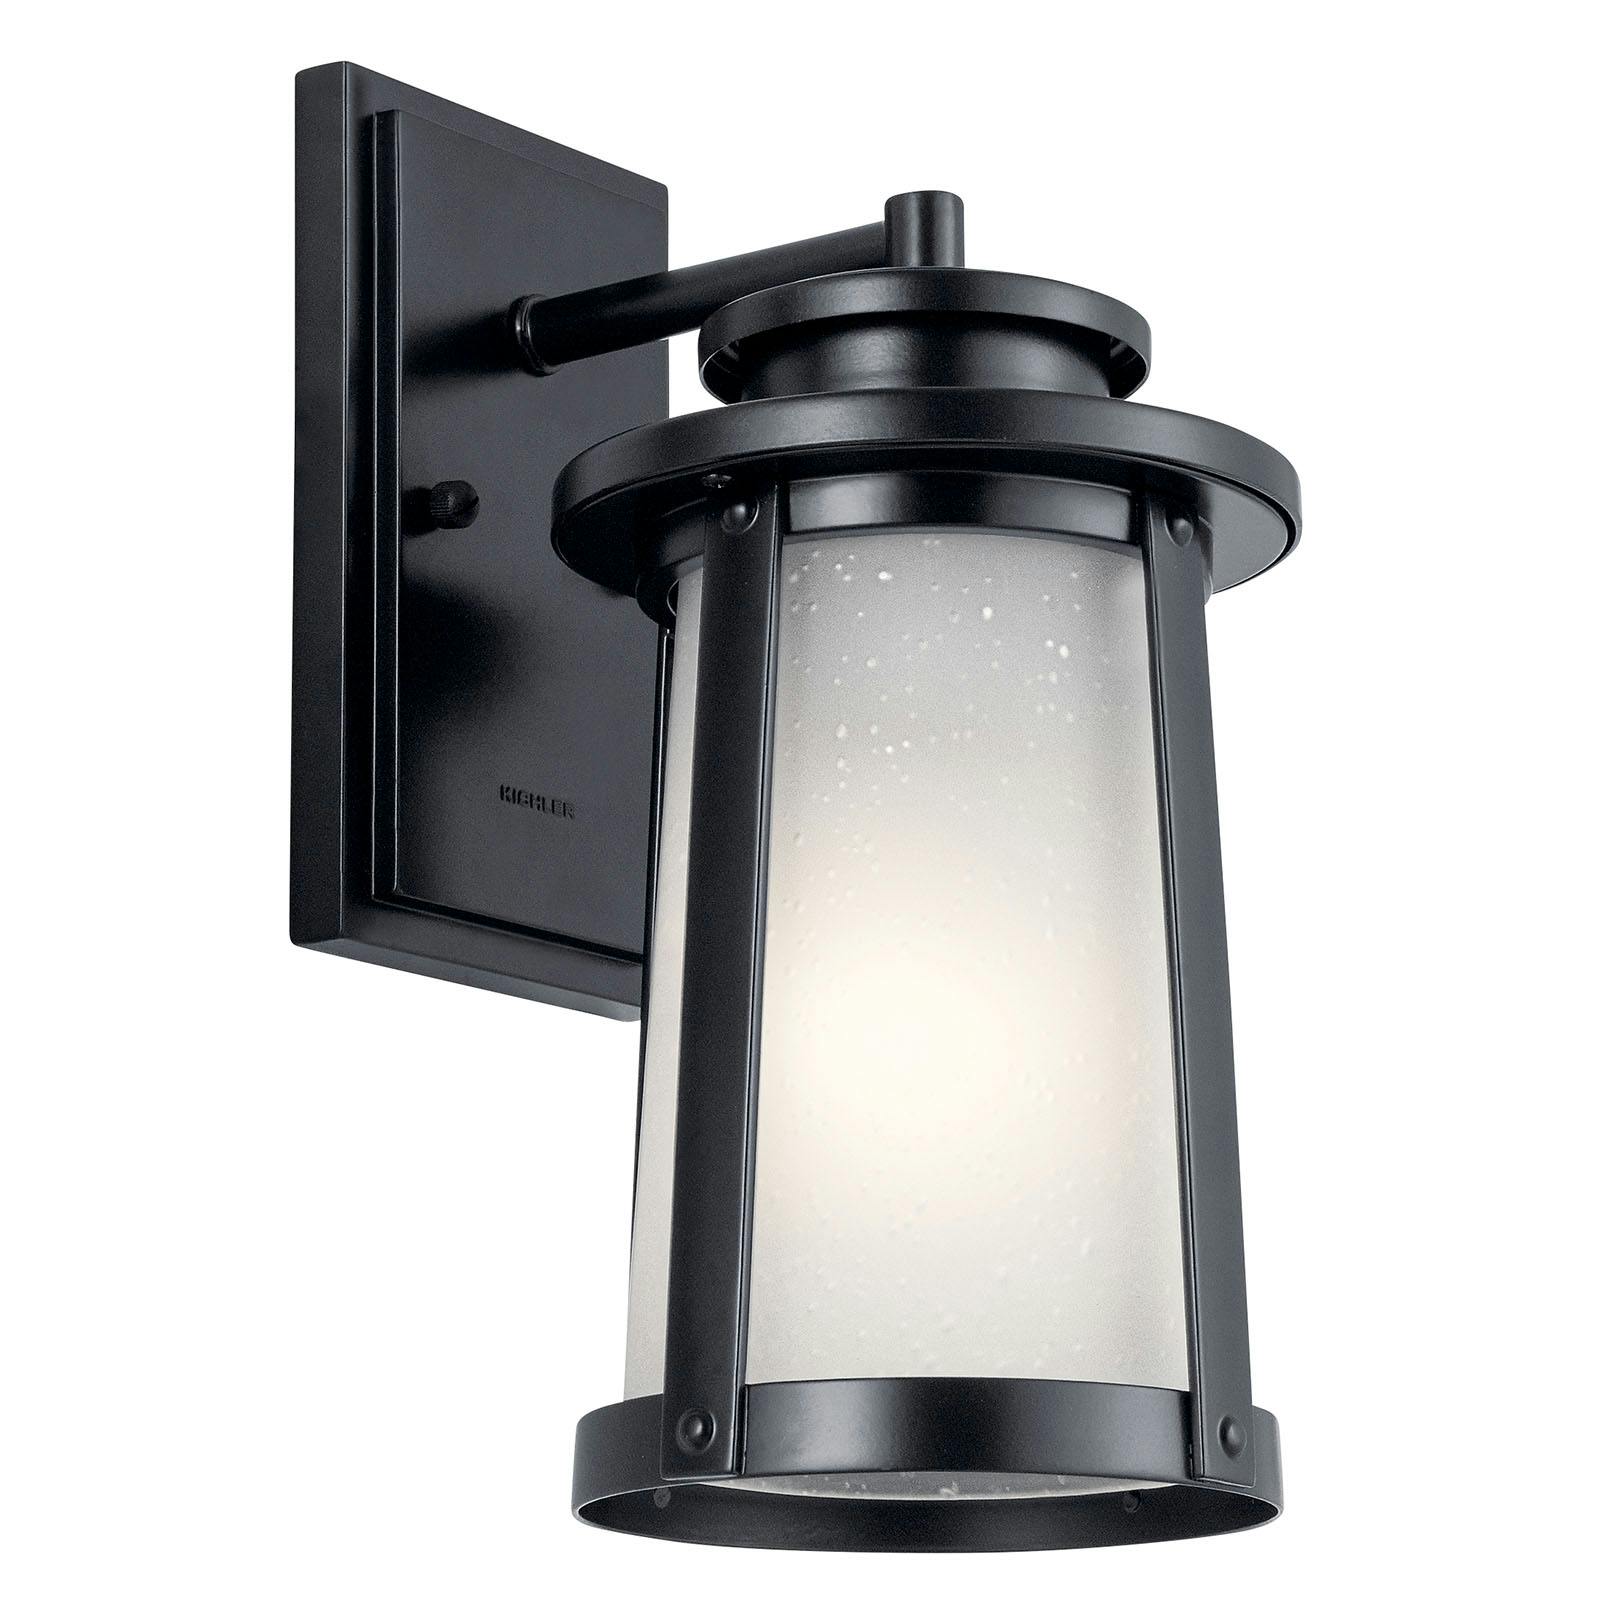 Harbor Bay 12.25" Wall Light Black on a white background